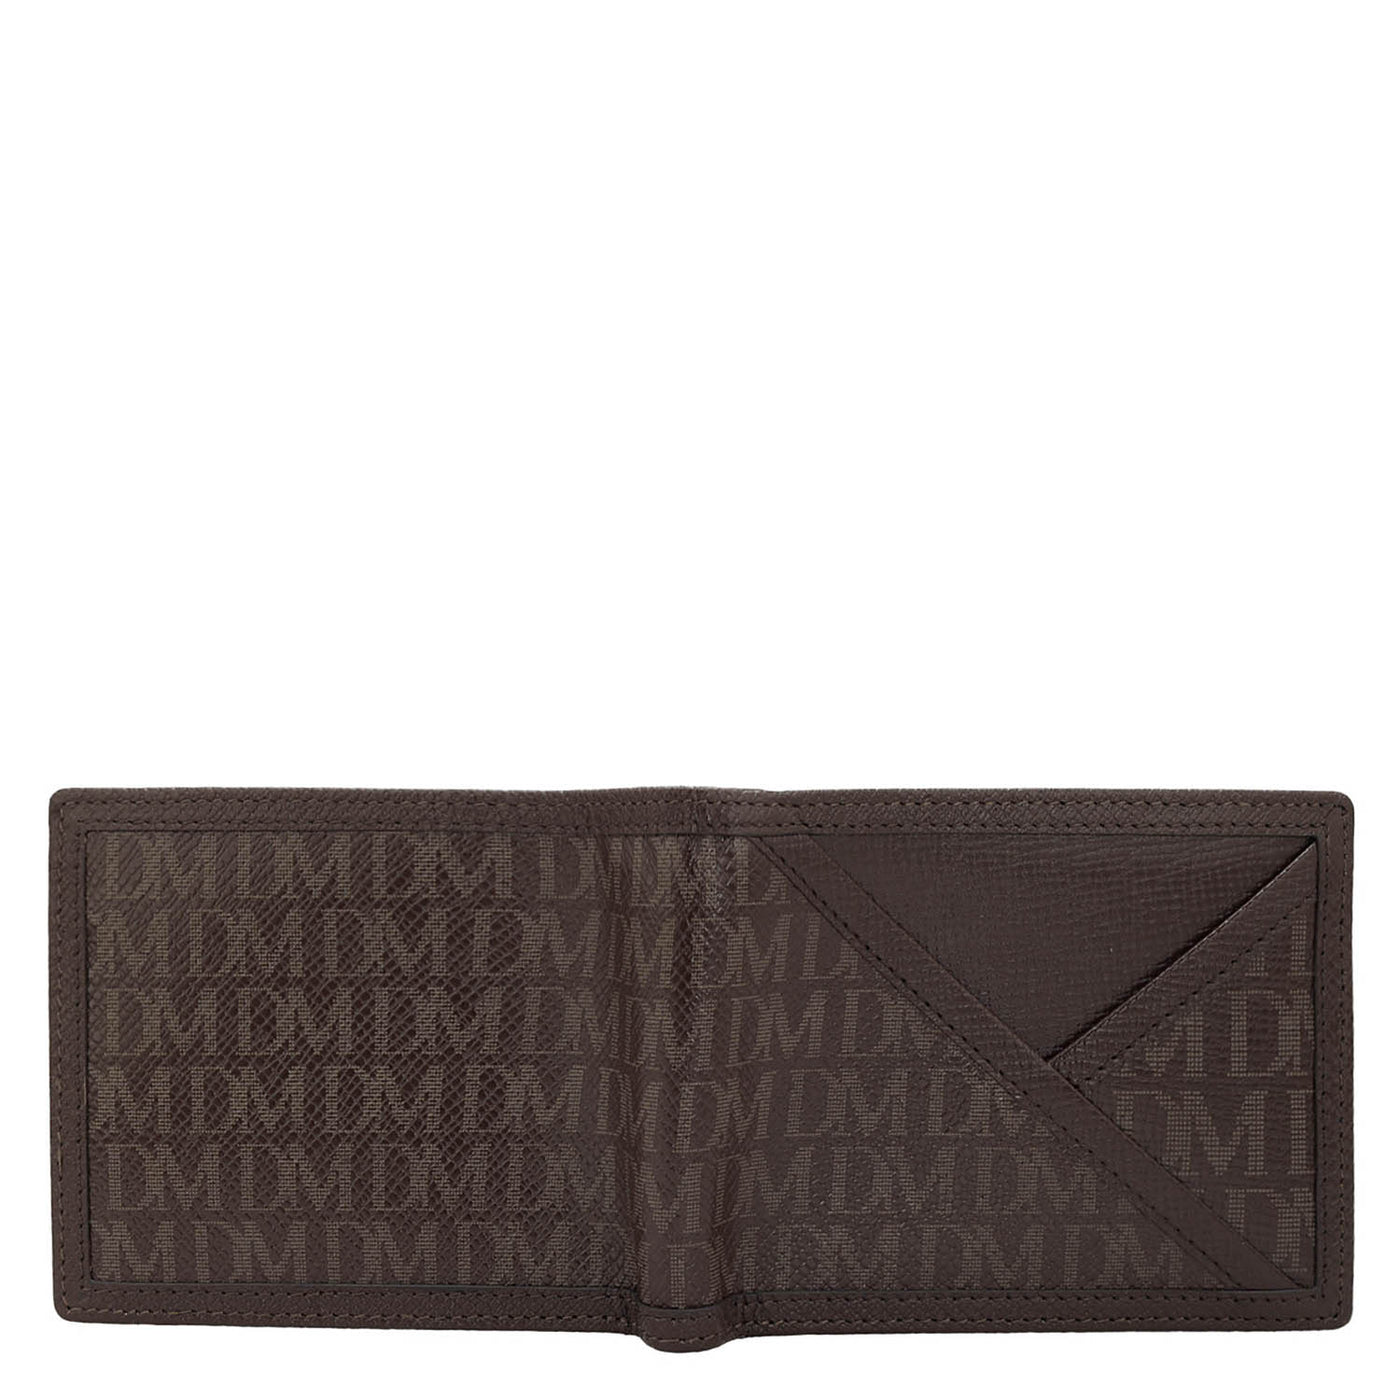 Monogram Franzy Leather Mens Wallet - Chocolate